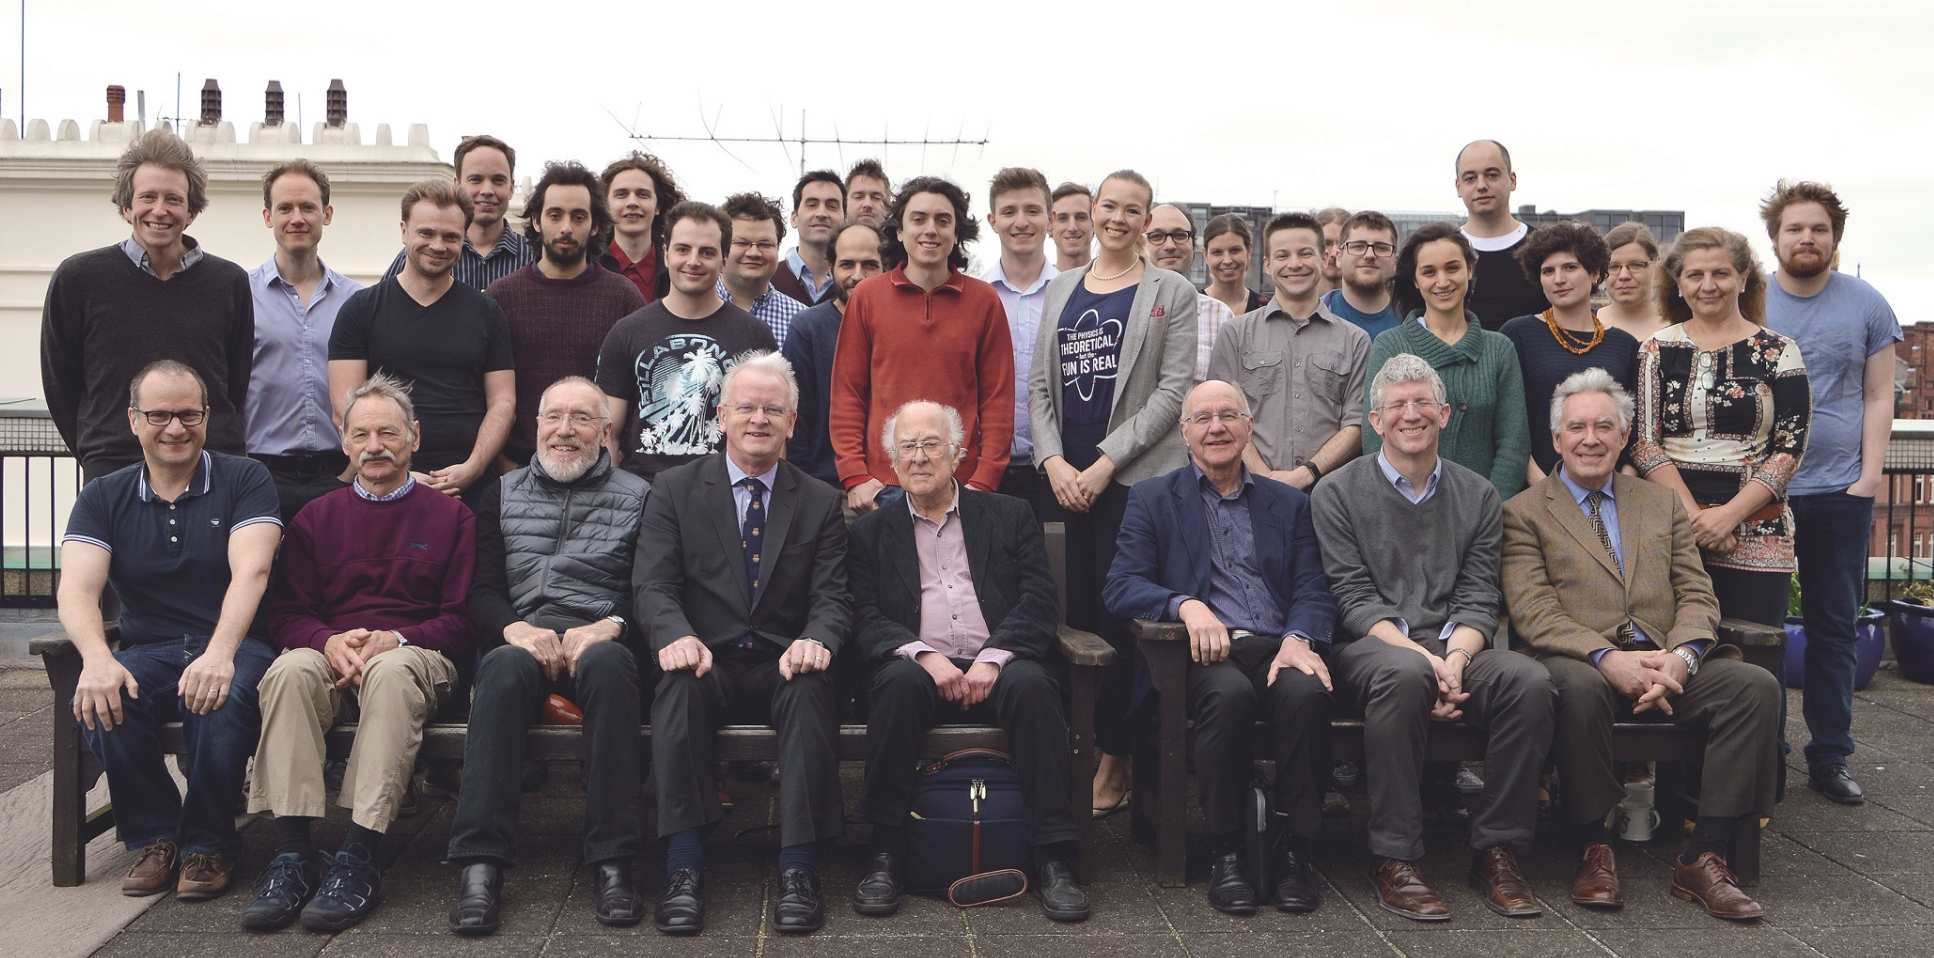 Nobel laureate Peter Higgs with James Stirling and Imperial physicists in 2017